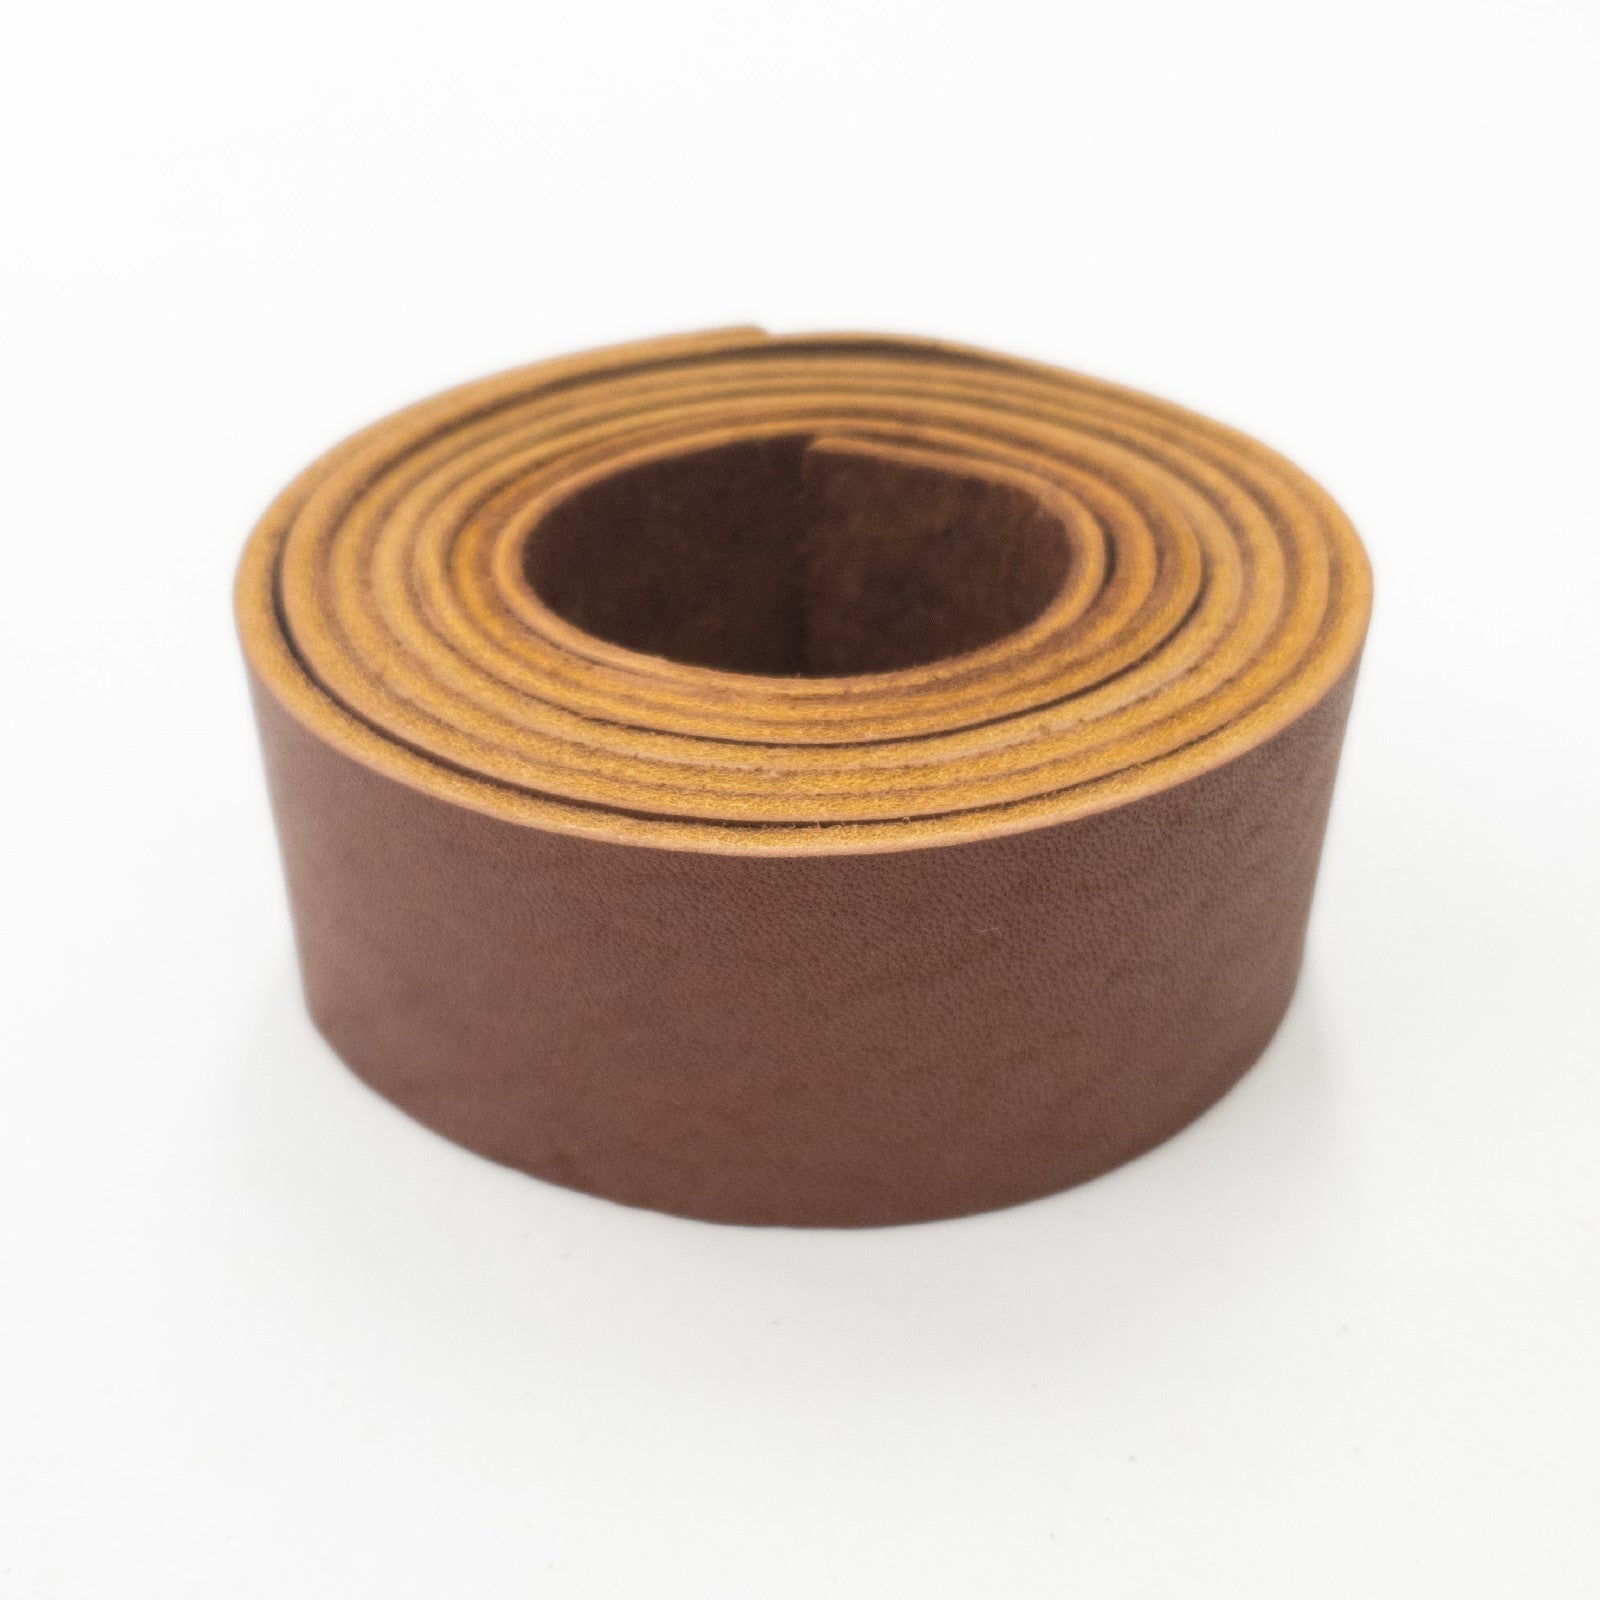 Oil Tanned Strap Seconds, 6-7 oz, Pre-cut Belt Blanks, Chestnut / 1 / 48" | The Leather Guy